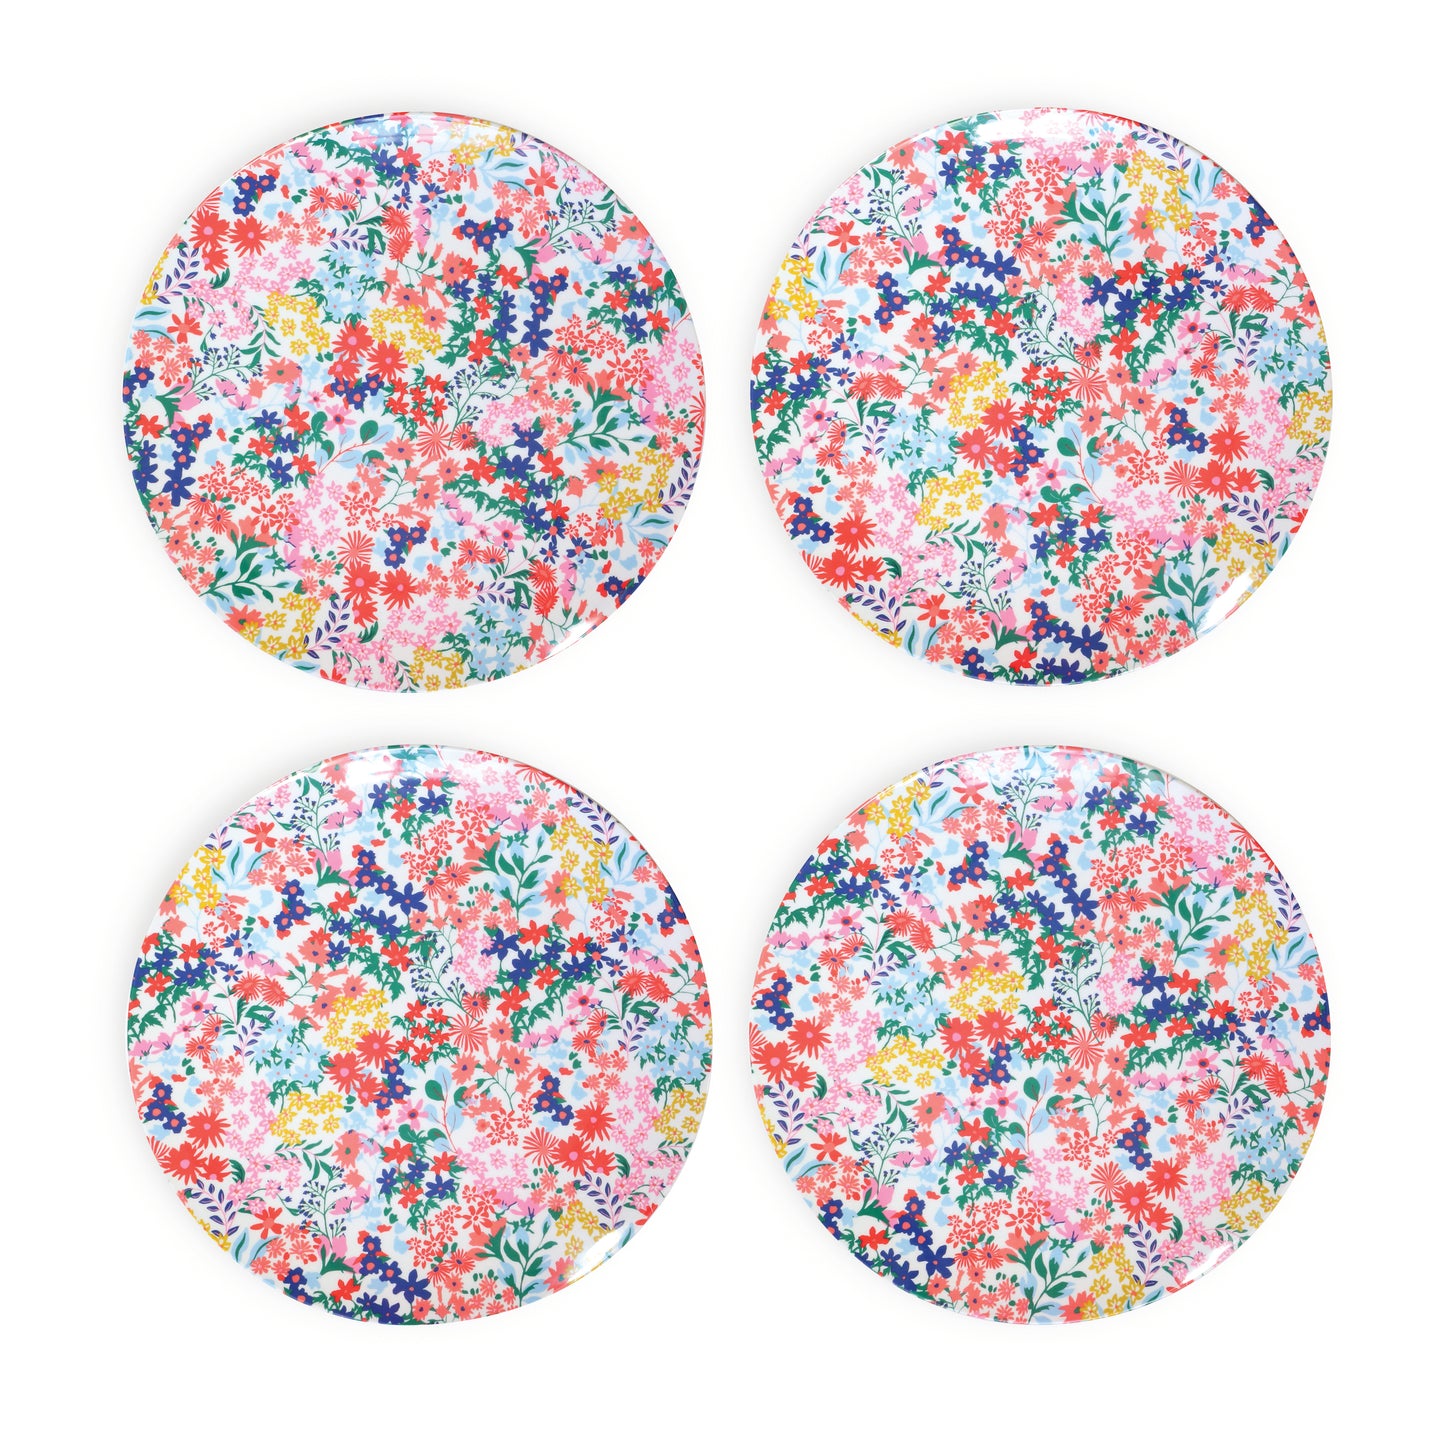 Set of four dining plates - Joules